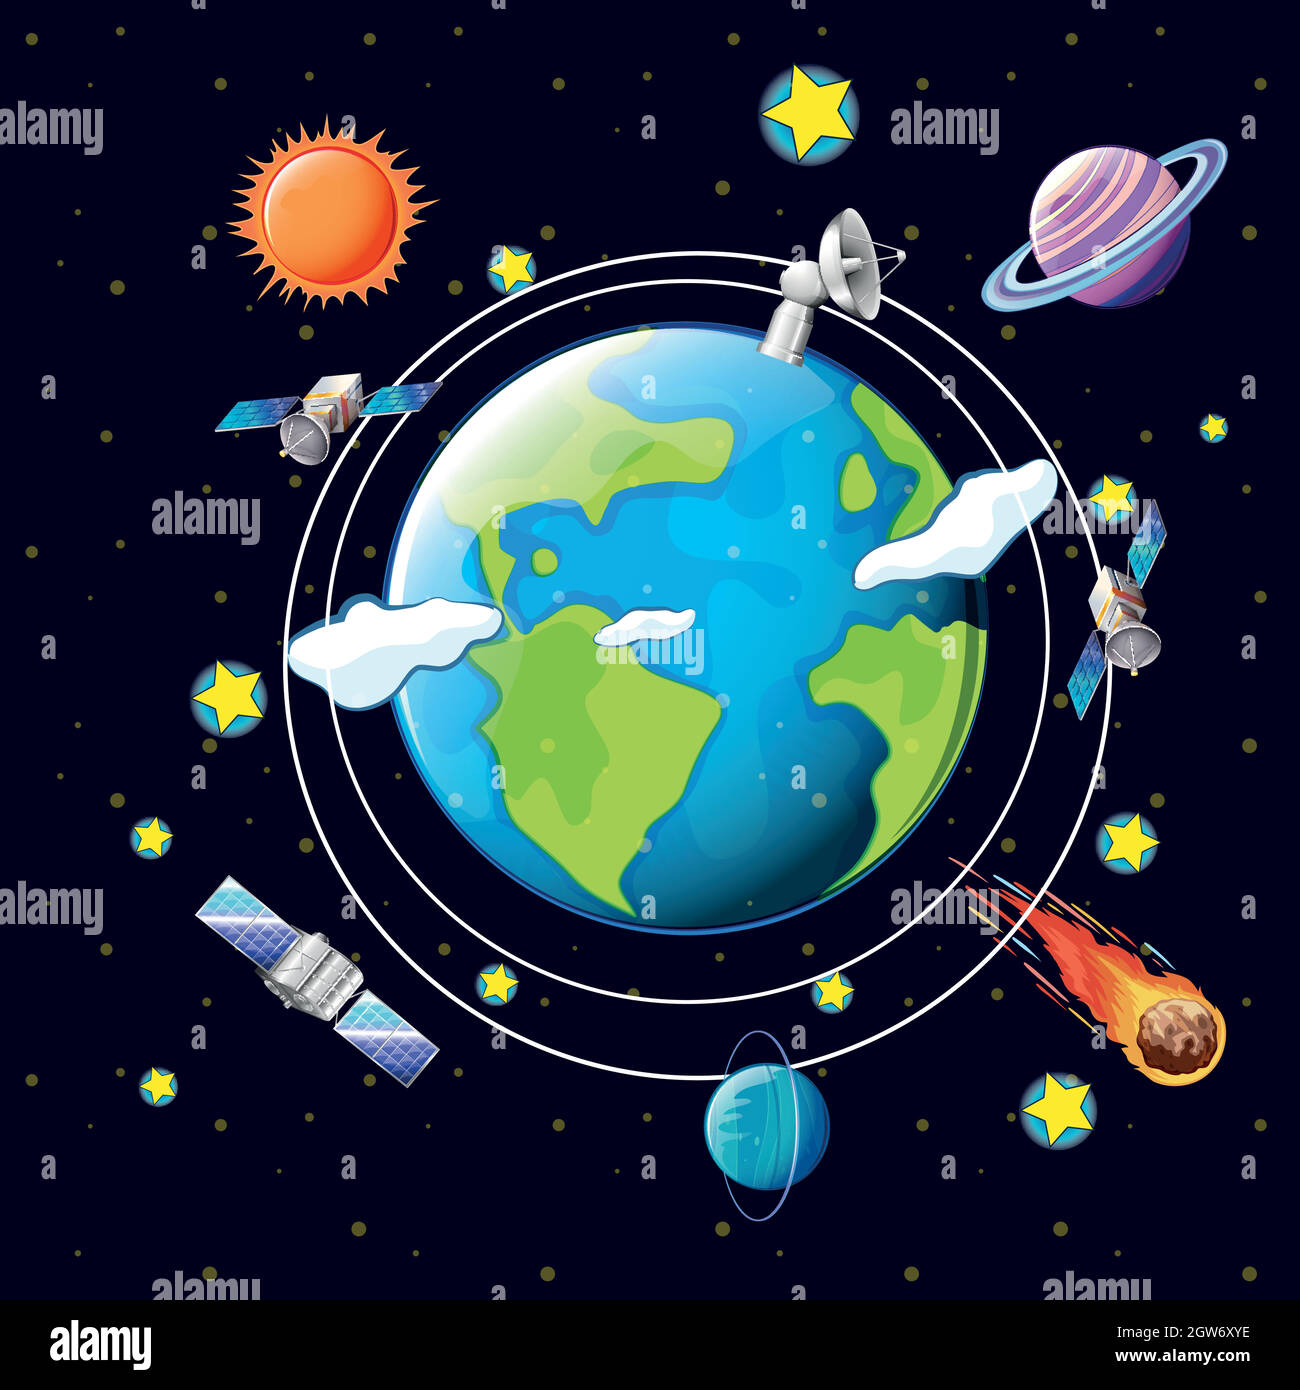 Space theme with satellites and planets around earth Stock Vector